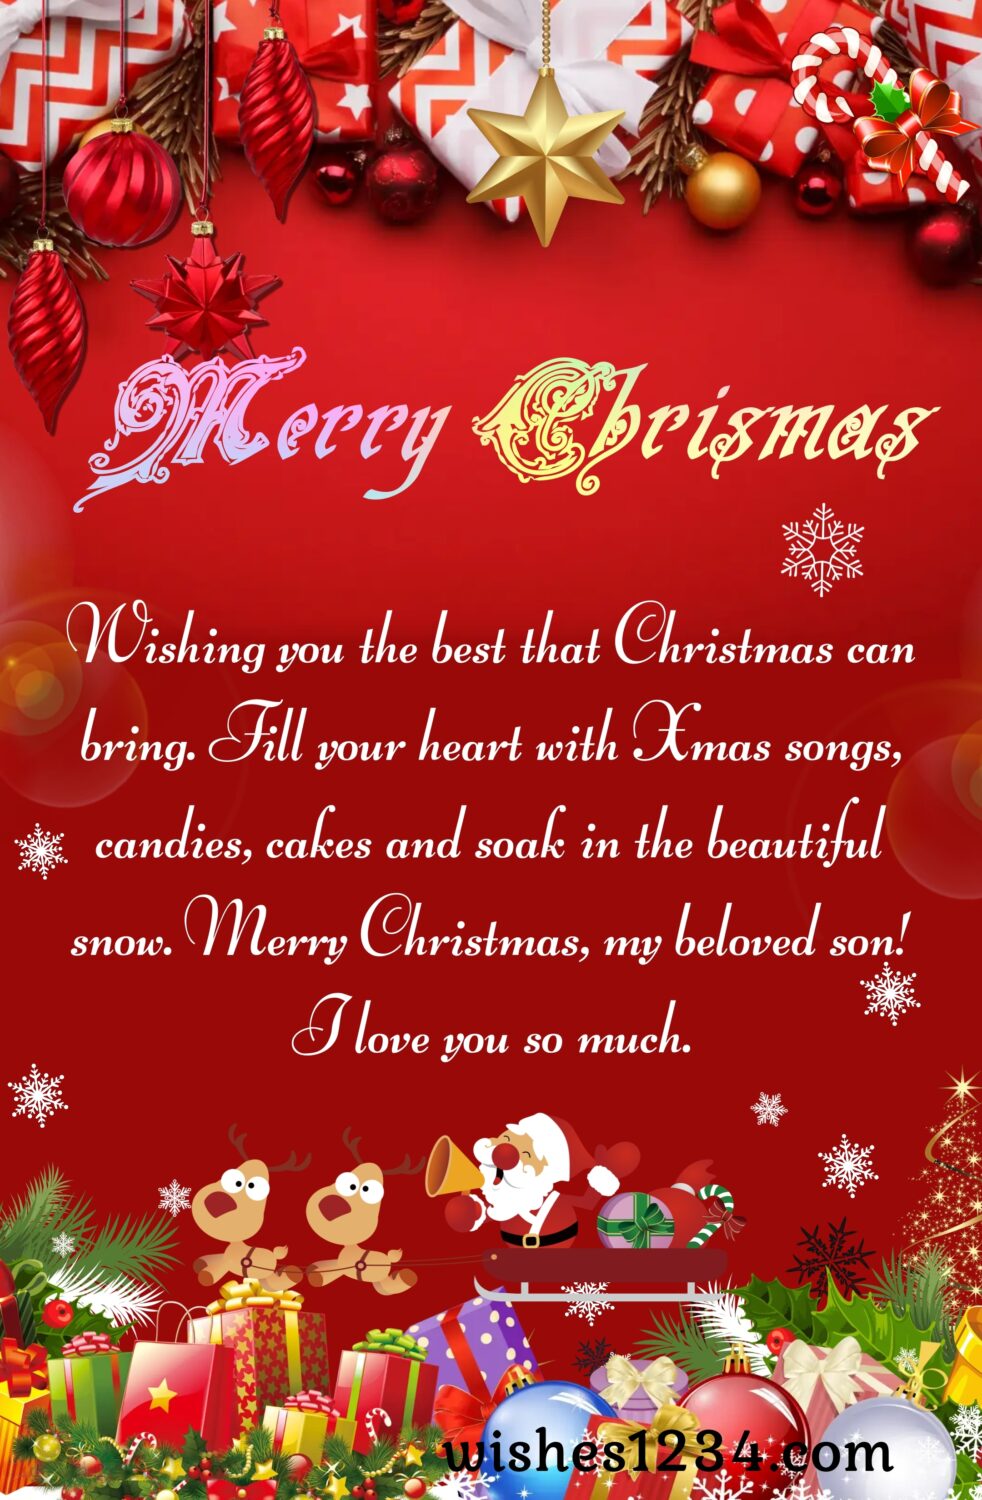 Christmas greetings for son, Merry Christmas Quotes & short wishes.